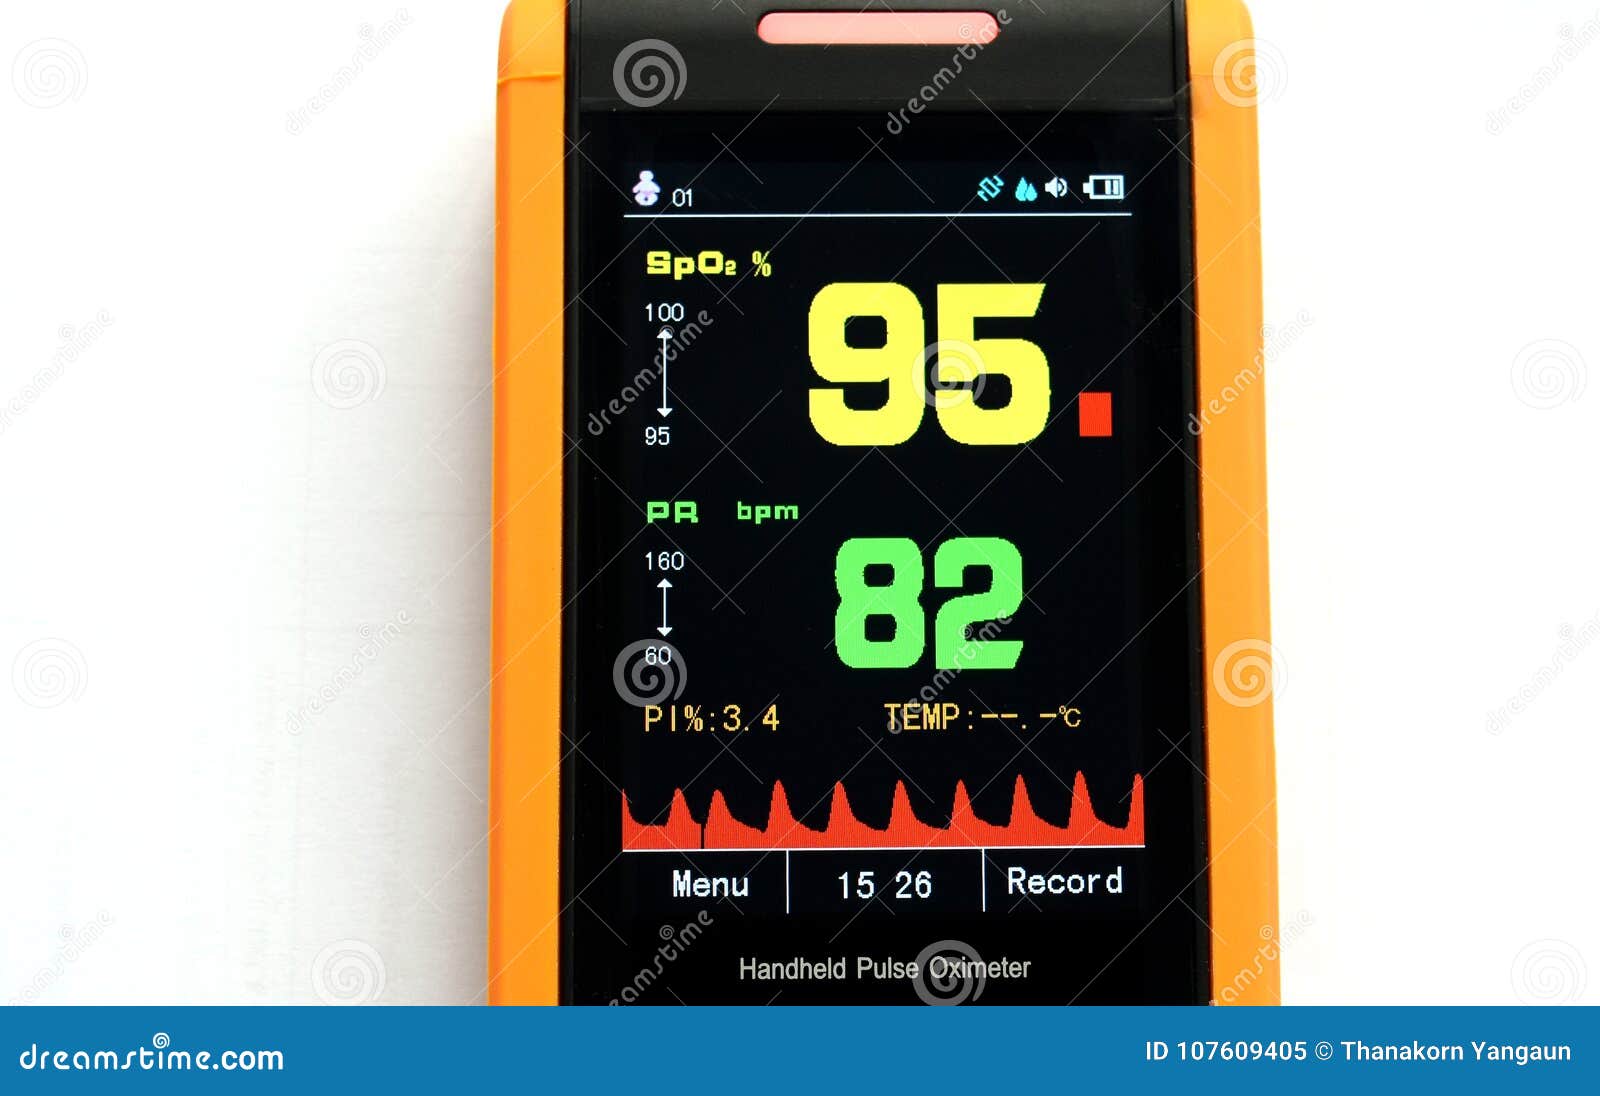 display of the pulse oximeter showing blood oxygen ninety-five in yellow and pulse eighty-two in green..